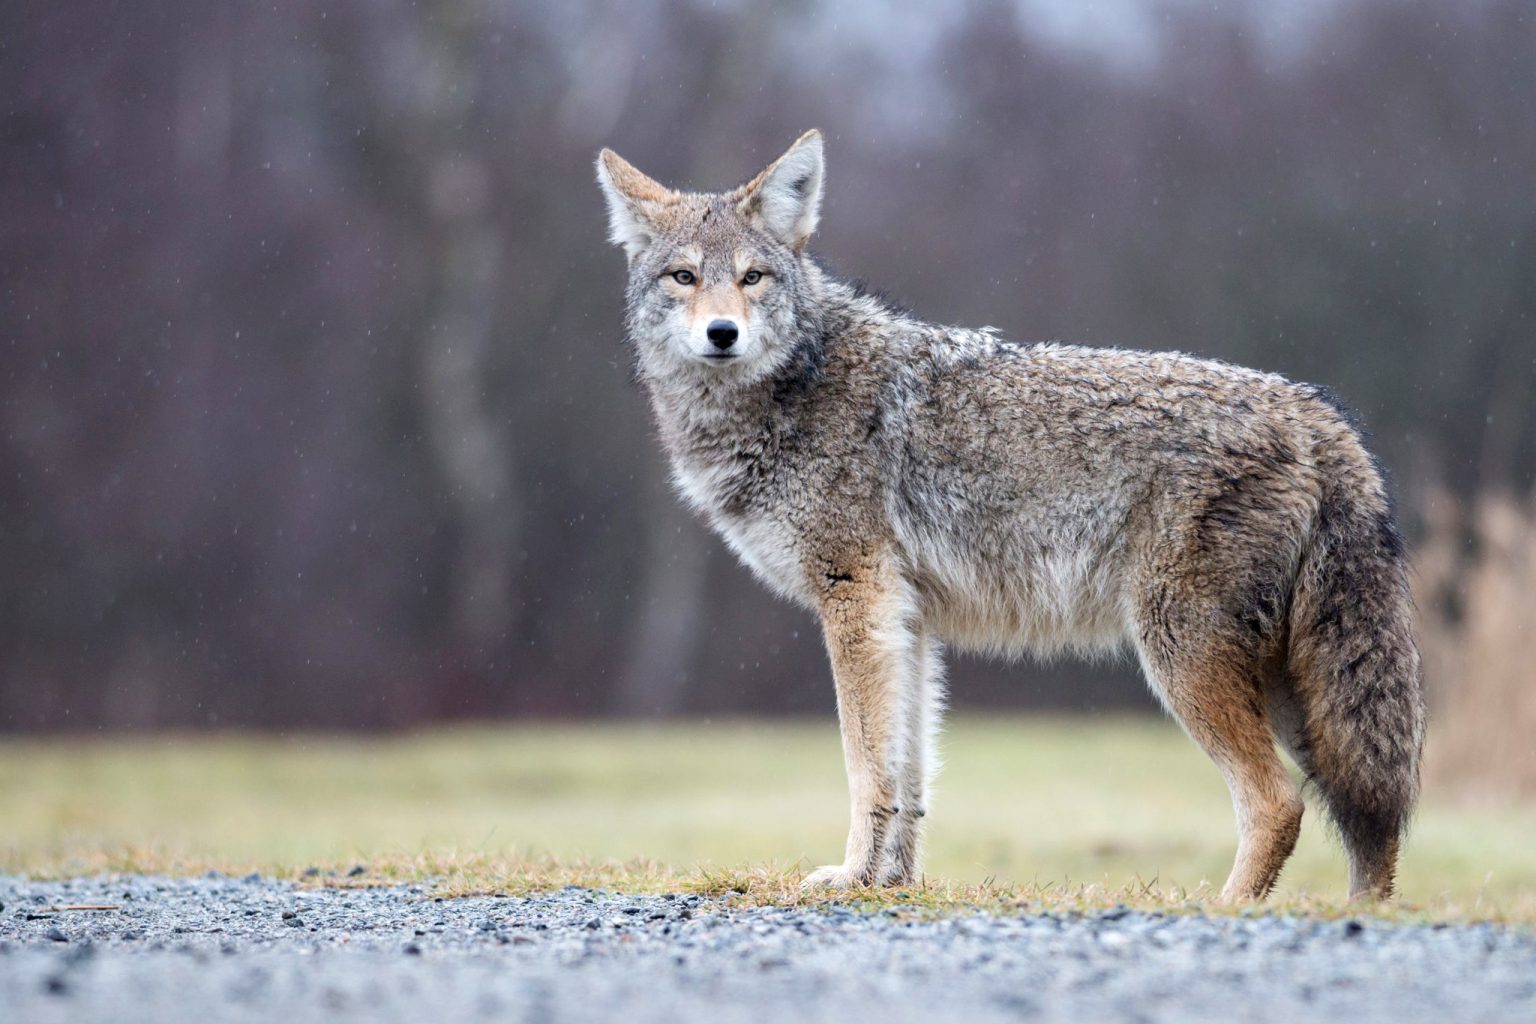 Coyote Sightings At One Per Day In Niagara On The Lake So Far This Year